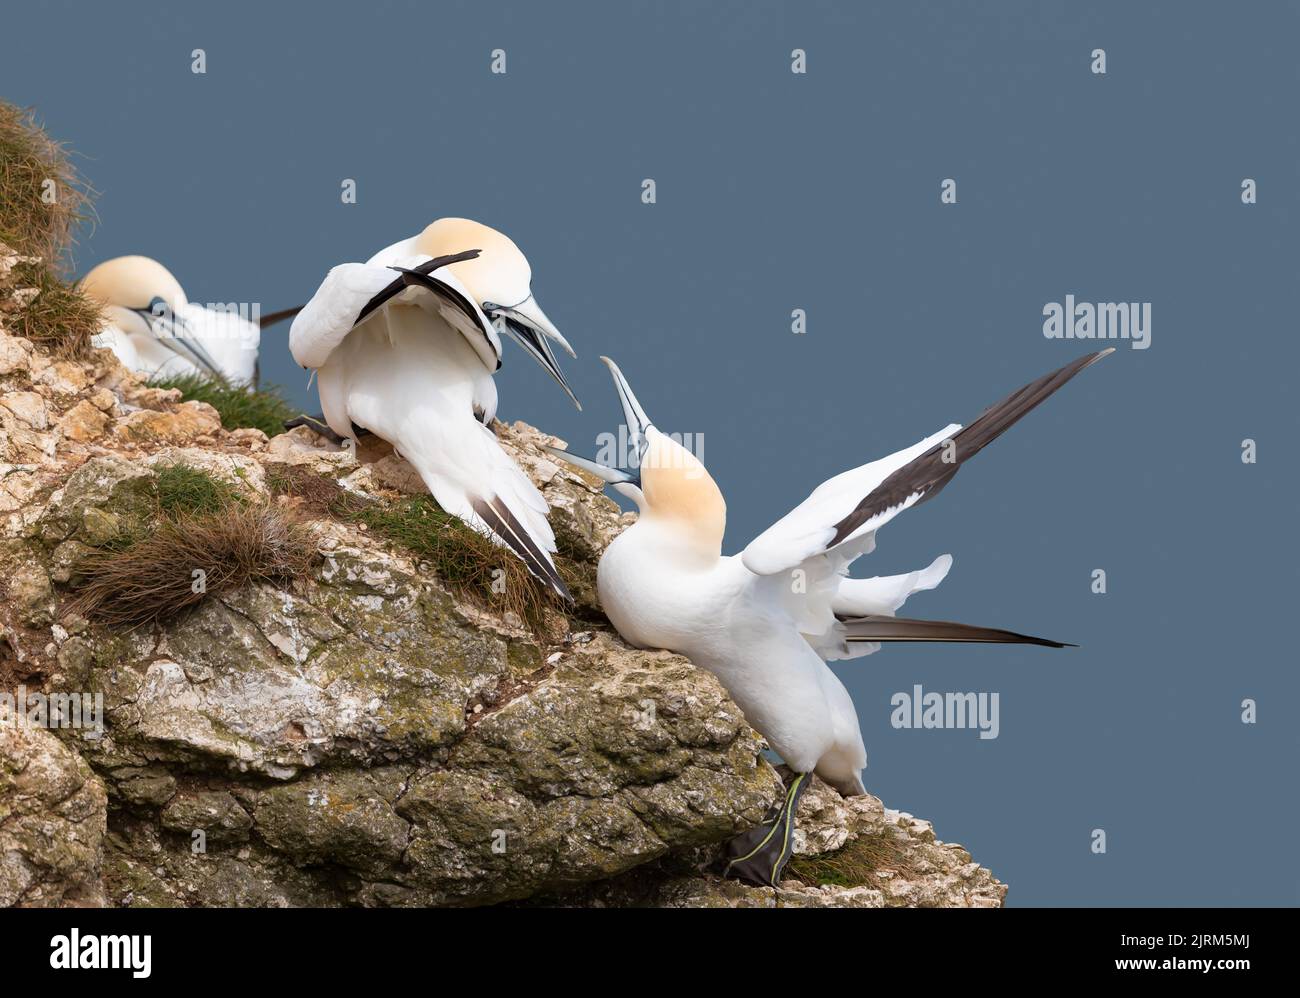 Close up of bonding Northern gannets (Morus bassana) fighting with each other, Bempton cliffs, UK. Stock Photo